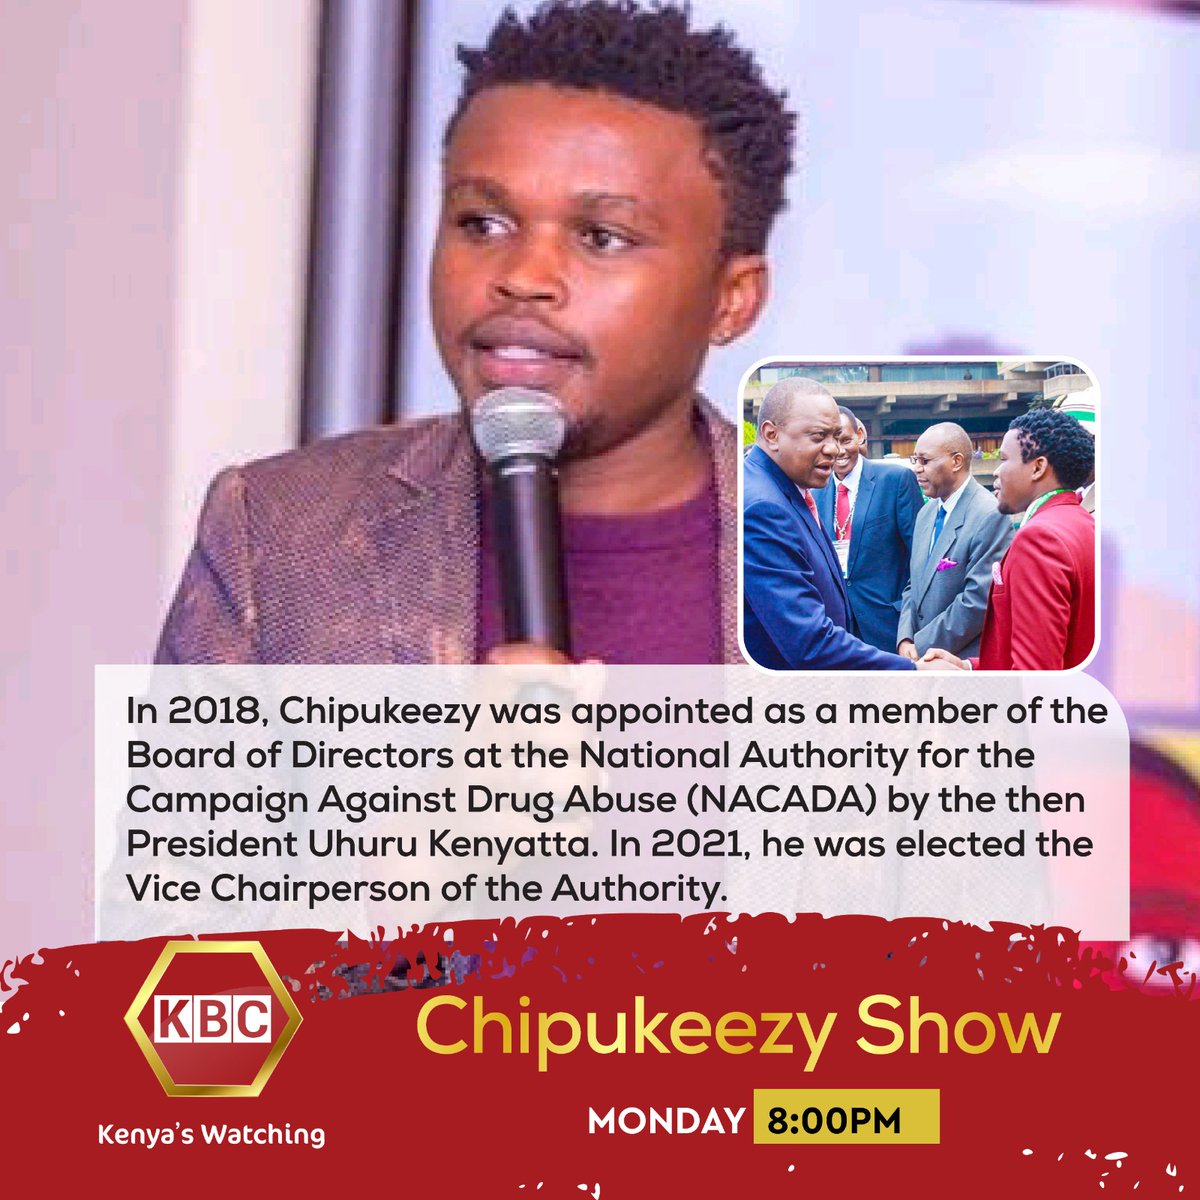 Background info' on Chipukeezy In 2018, Chipukeezy was appointed as a member of the Board of Directors at the National Authority for the Campaign Against Drug Abuse (NACADA) by formaer president, Uhuru Kenyatta. #ChipukeezyShowonKBC on @KBCChannel1